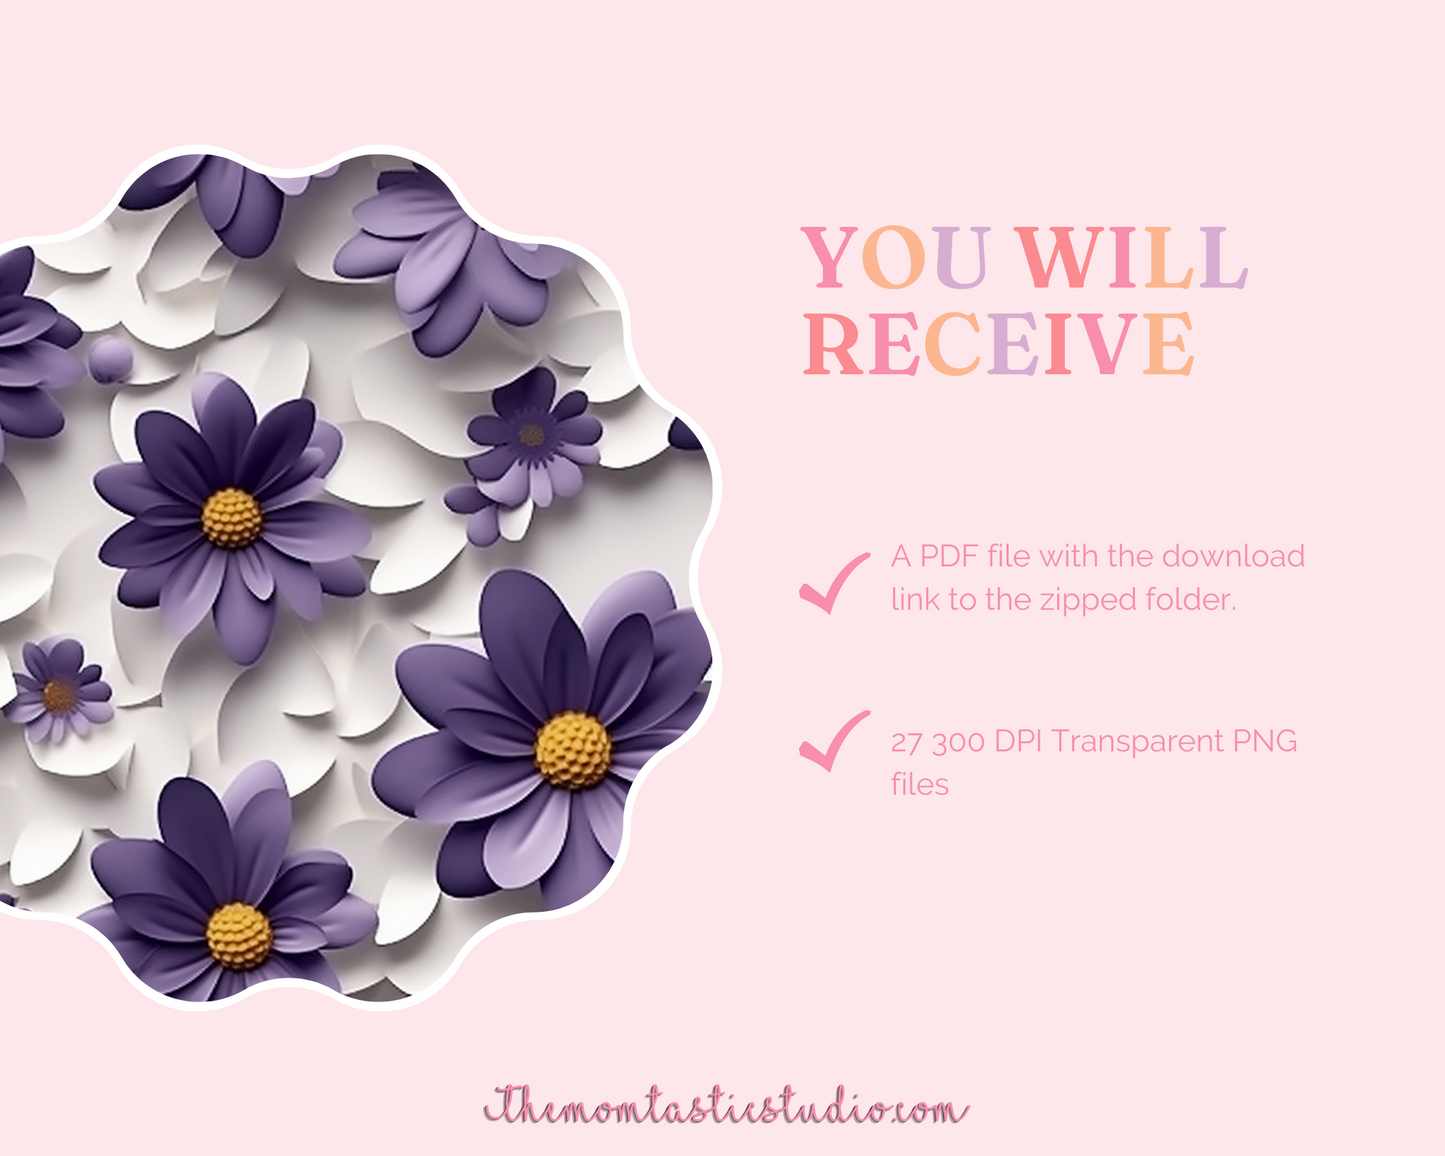 3D Pastel Floral (Seamless, A4, and Mug Wrap Format) - Commercial Use